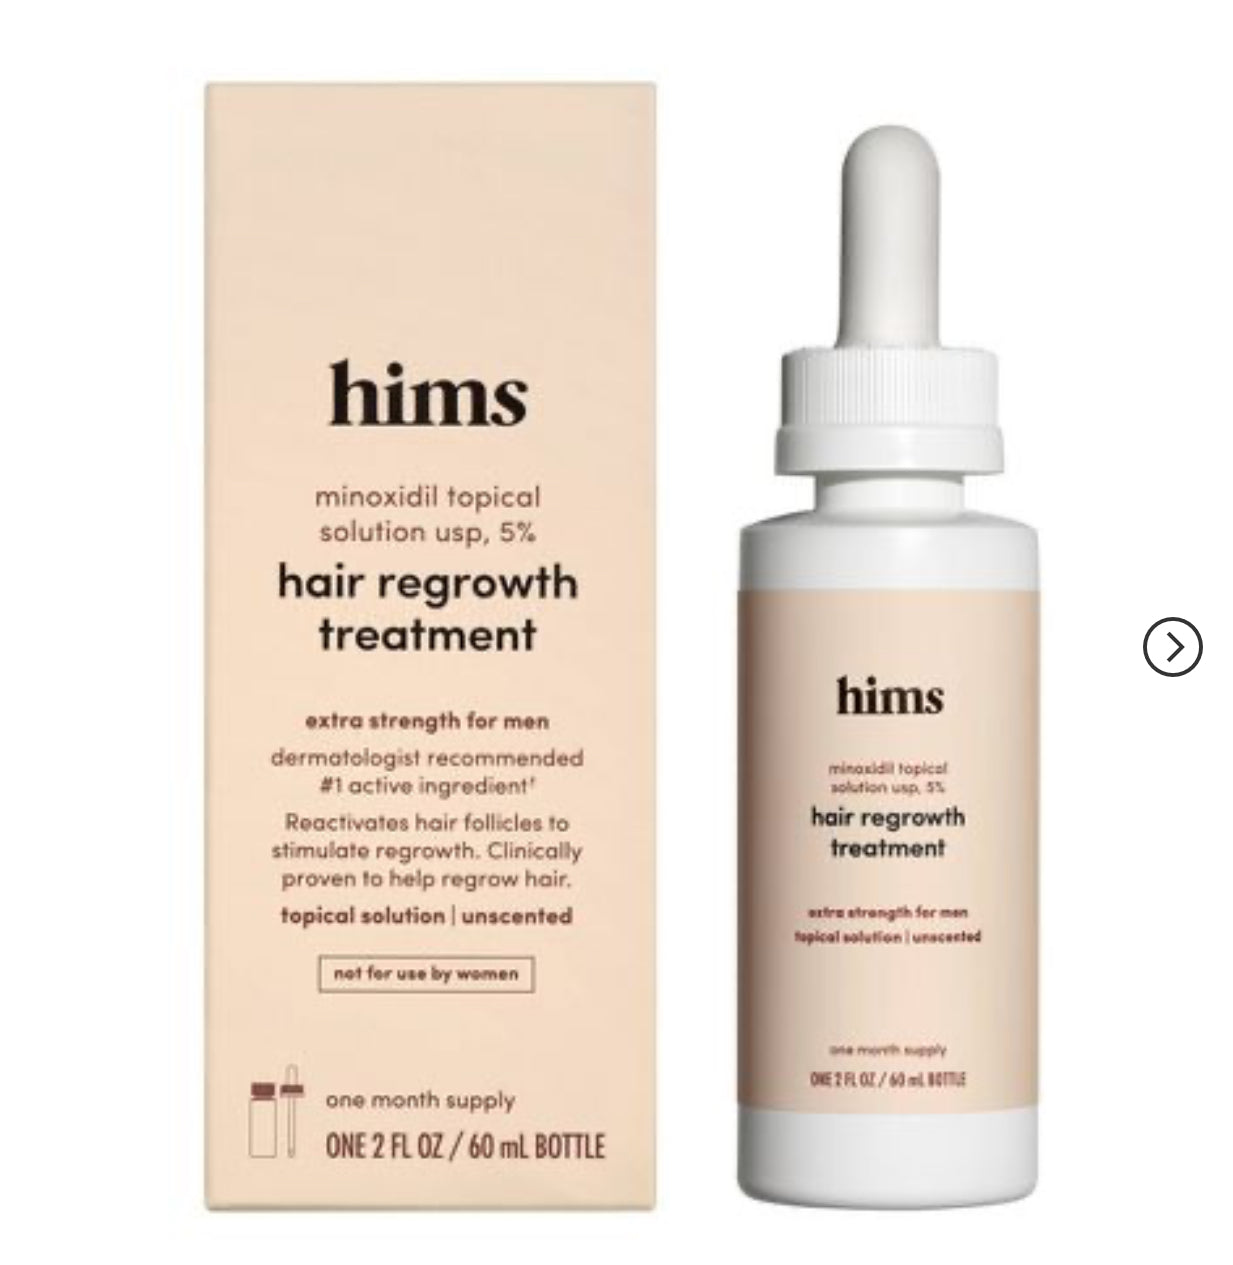 Hims minoxidil topical solution usp, 5%